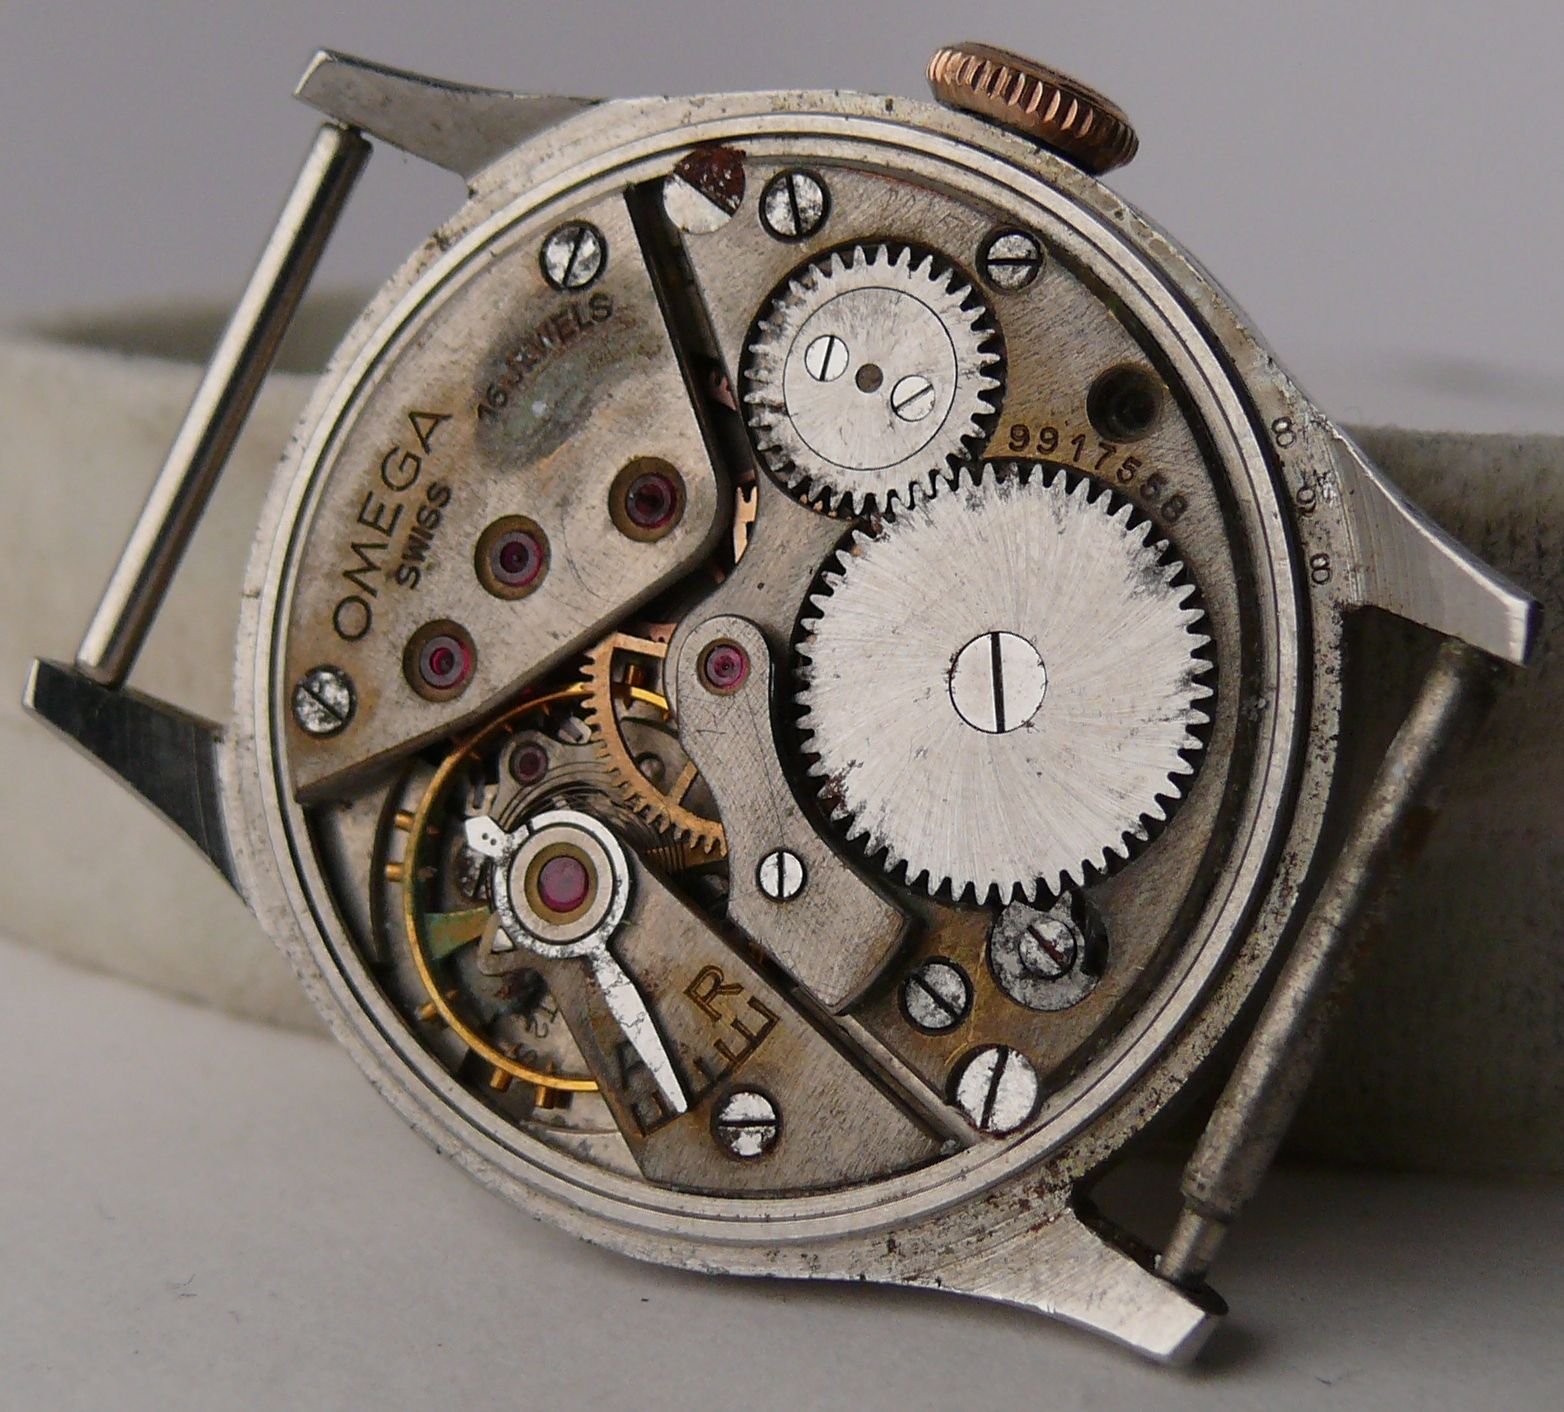 Vintage Gents Omega Manual Wind 30T2 Wristwatch. Please note this watch does not currently work - Image 6 of 8